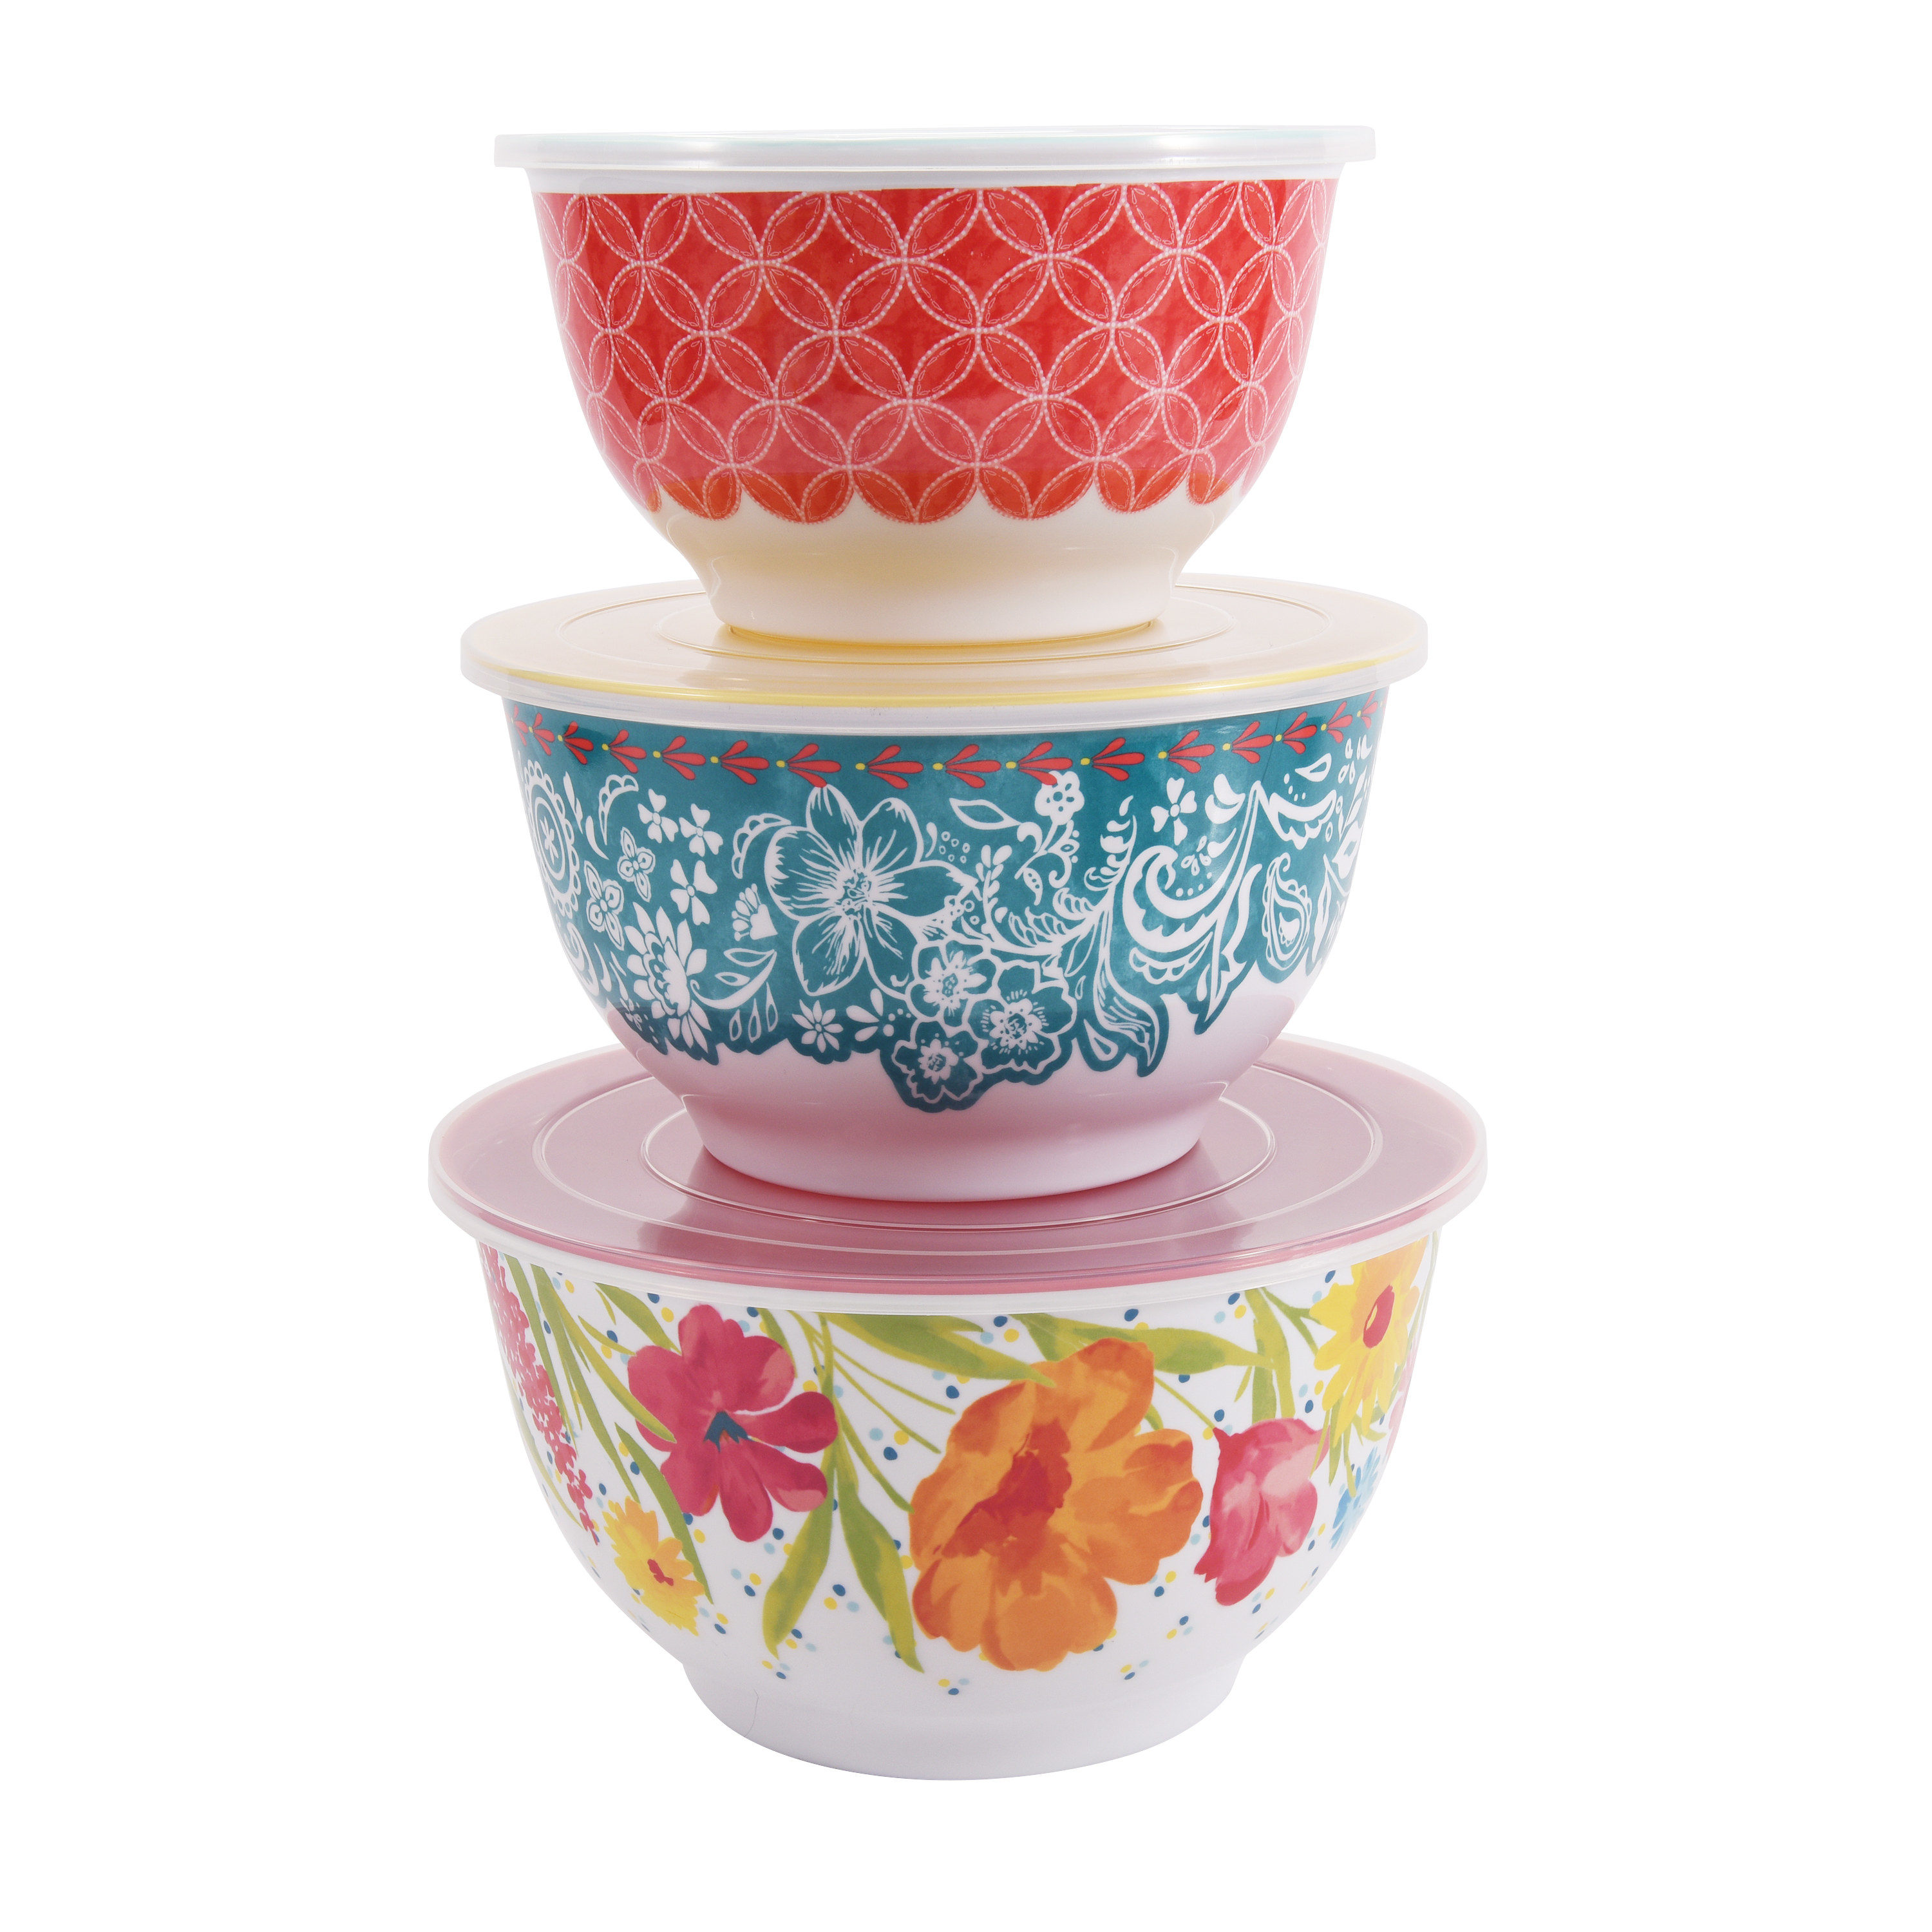 The three floral bowls 